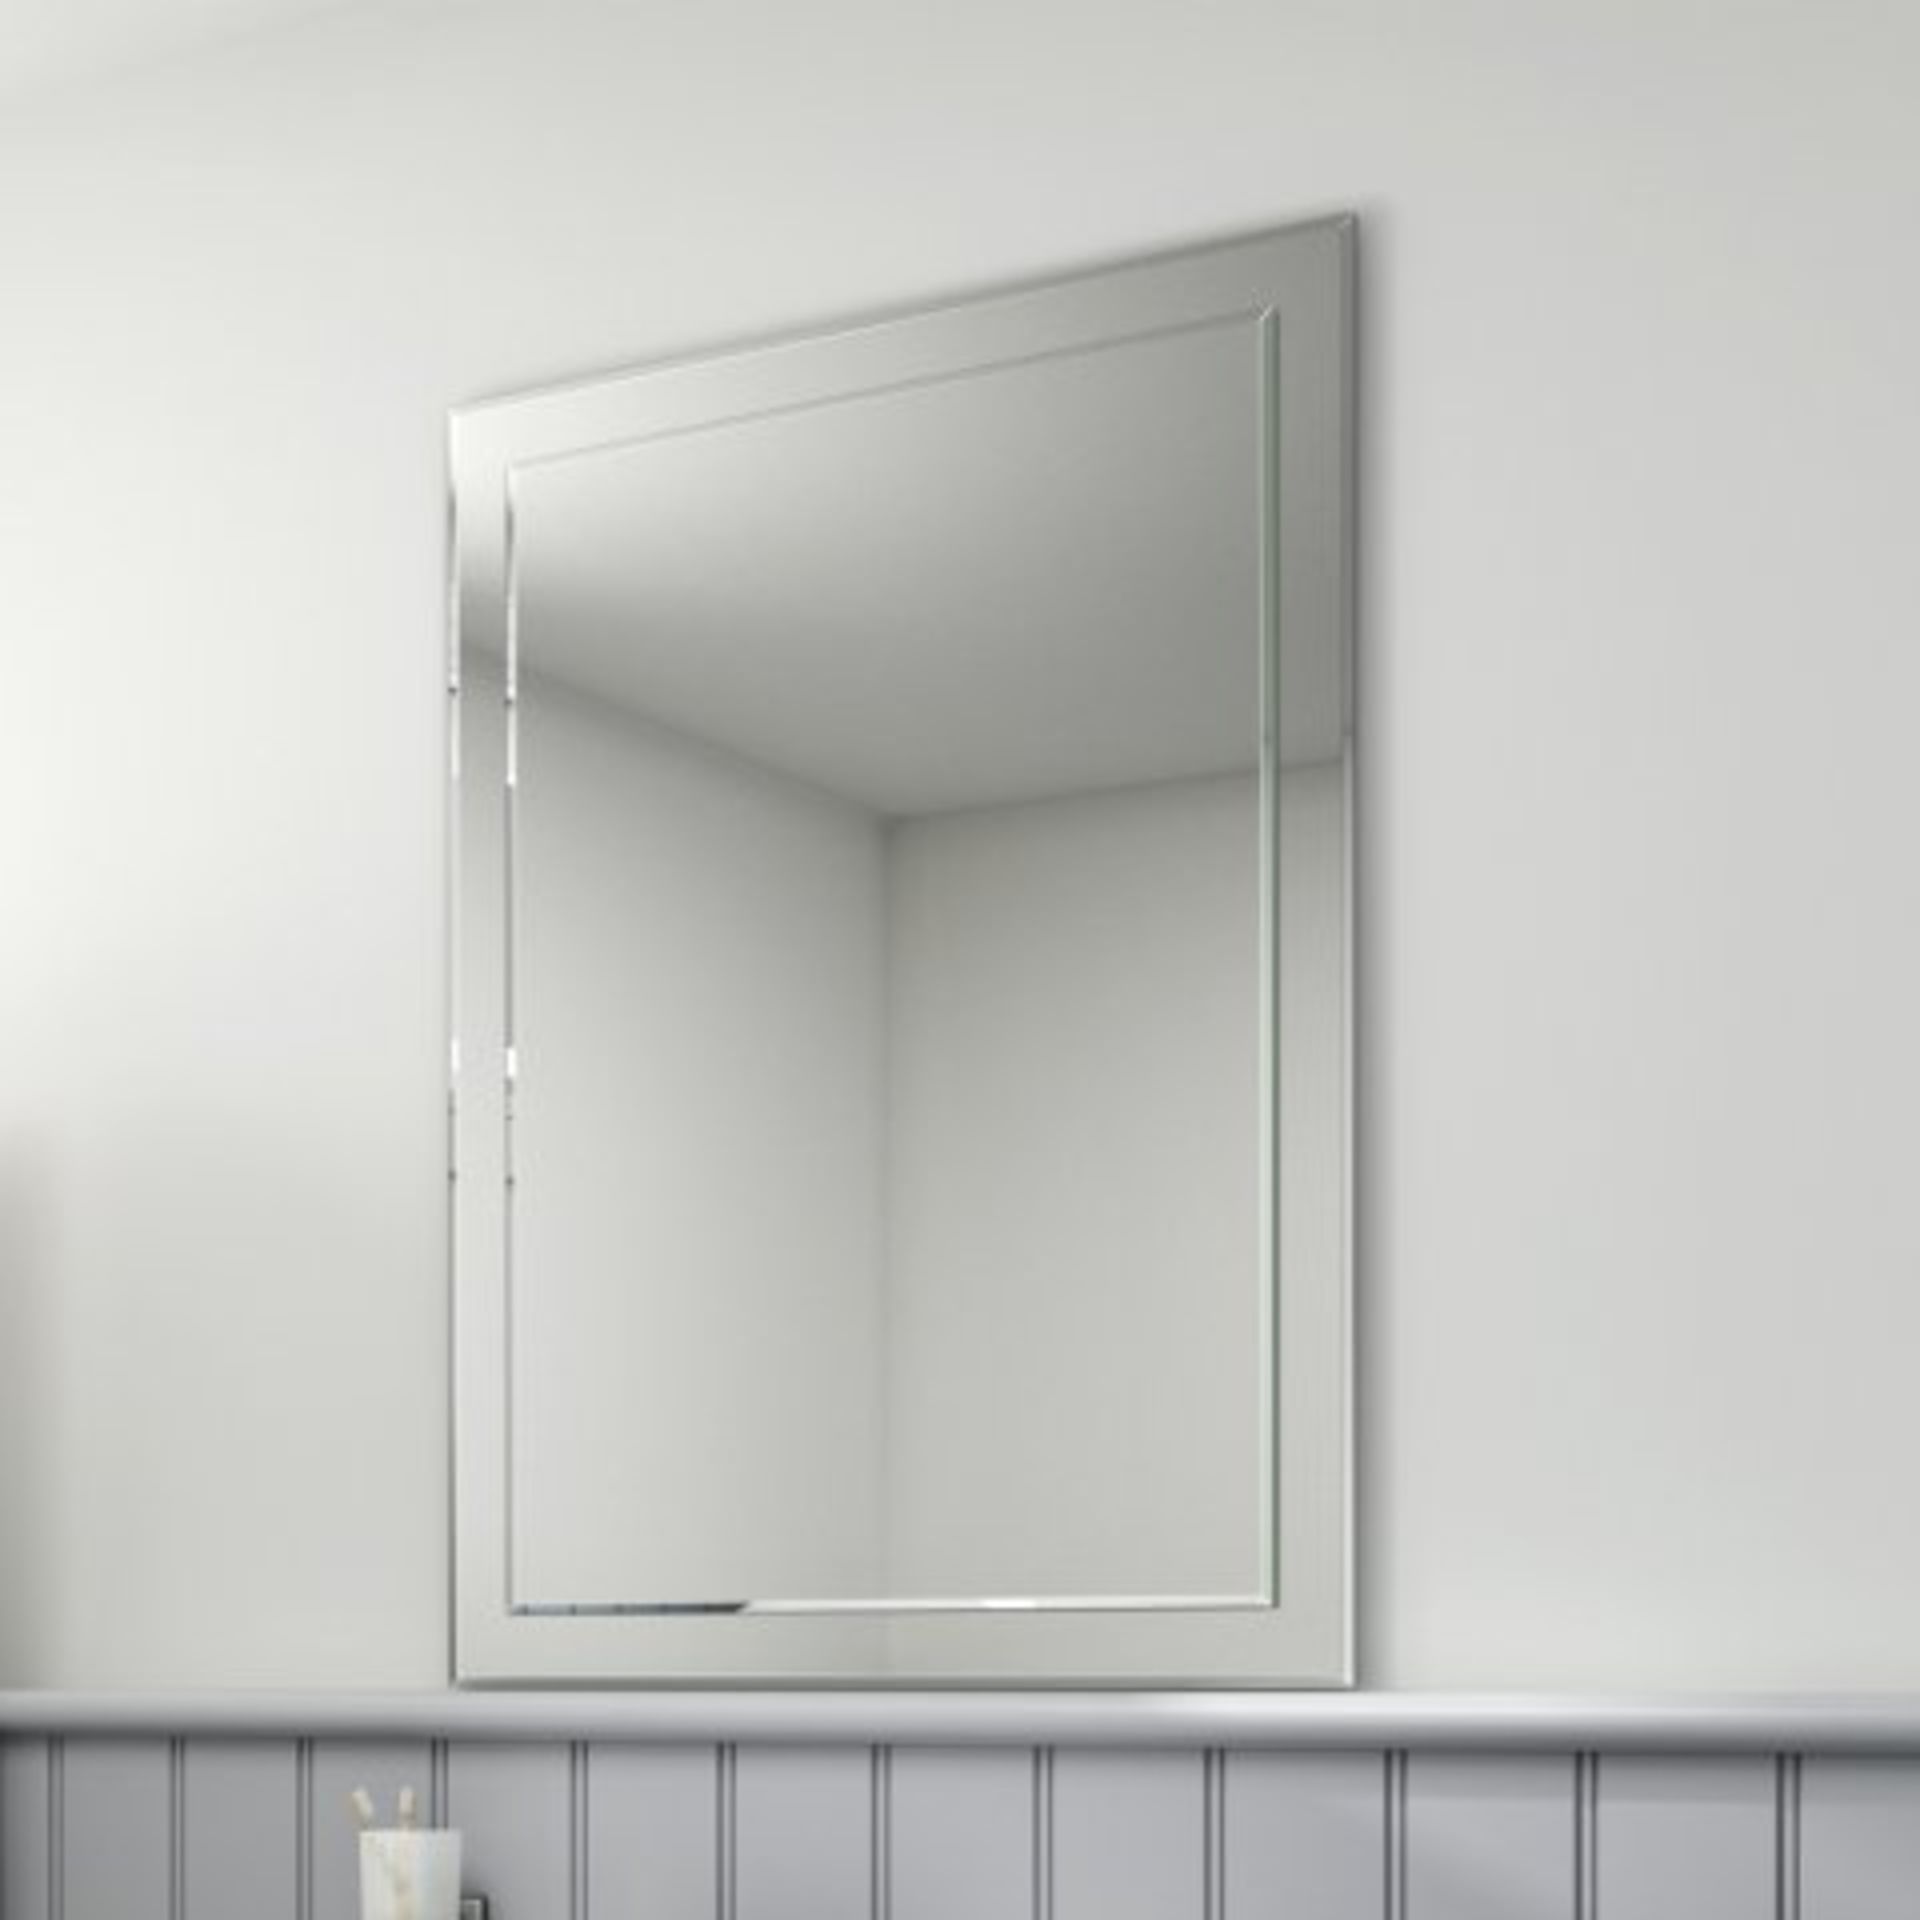 (H214) 650x900mm Bevel Mirror. RRP £199.99. Enjoy reflection perfection with our 650x900 Bevel